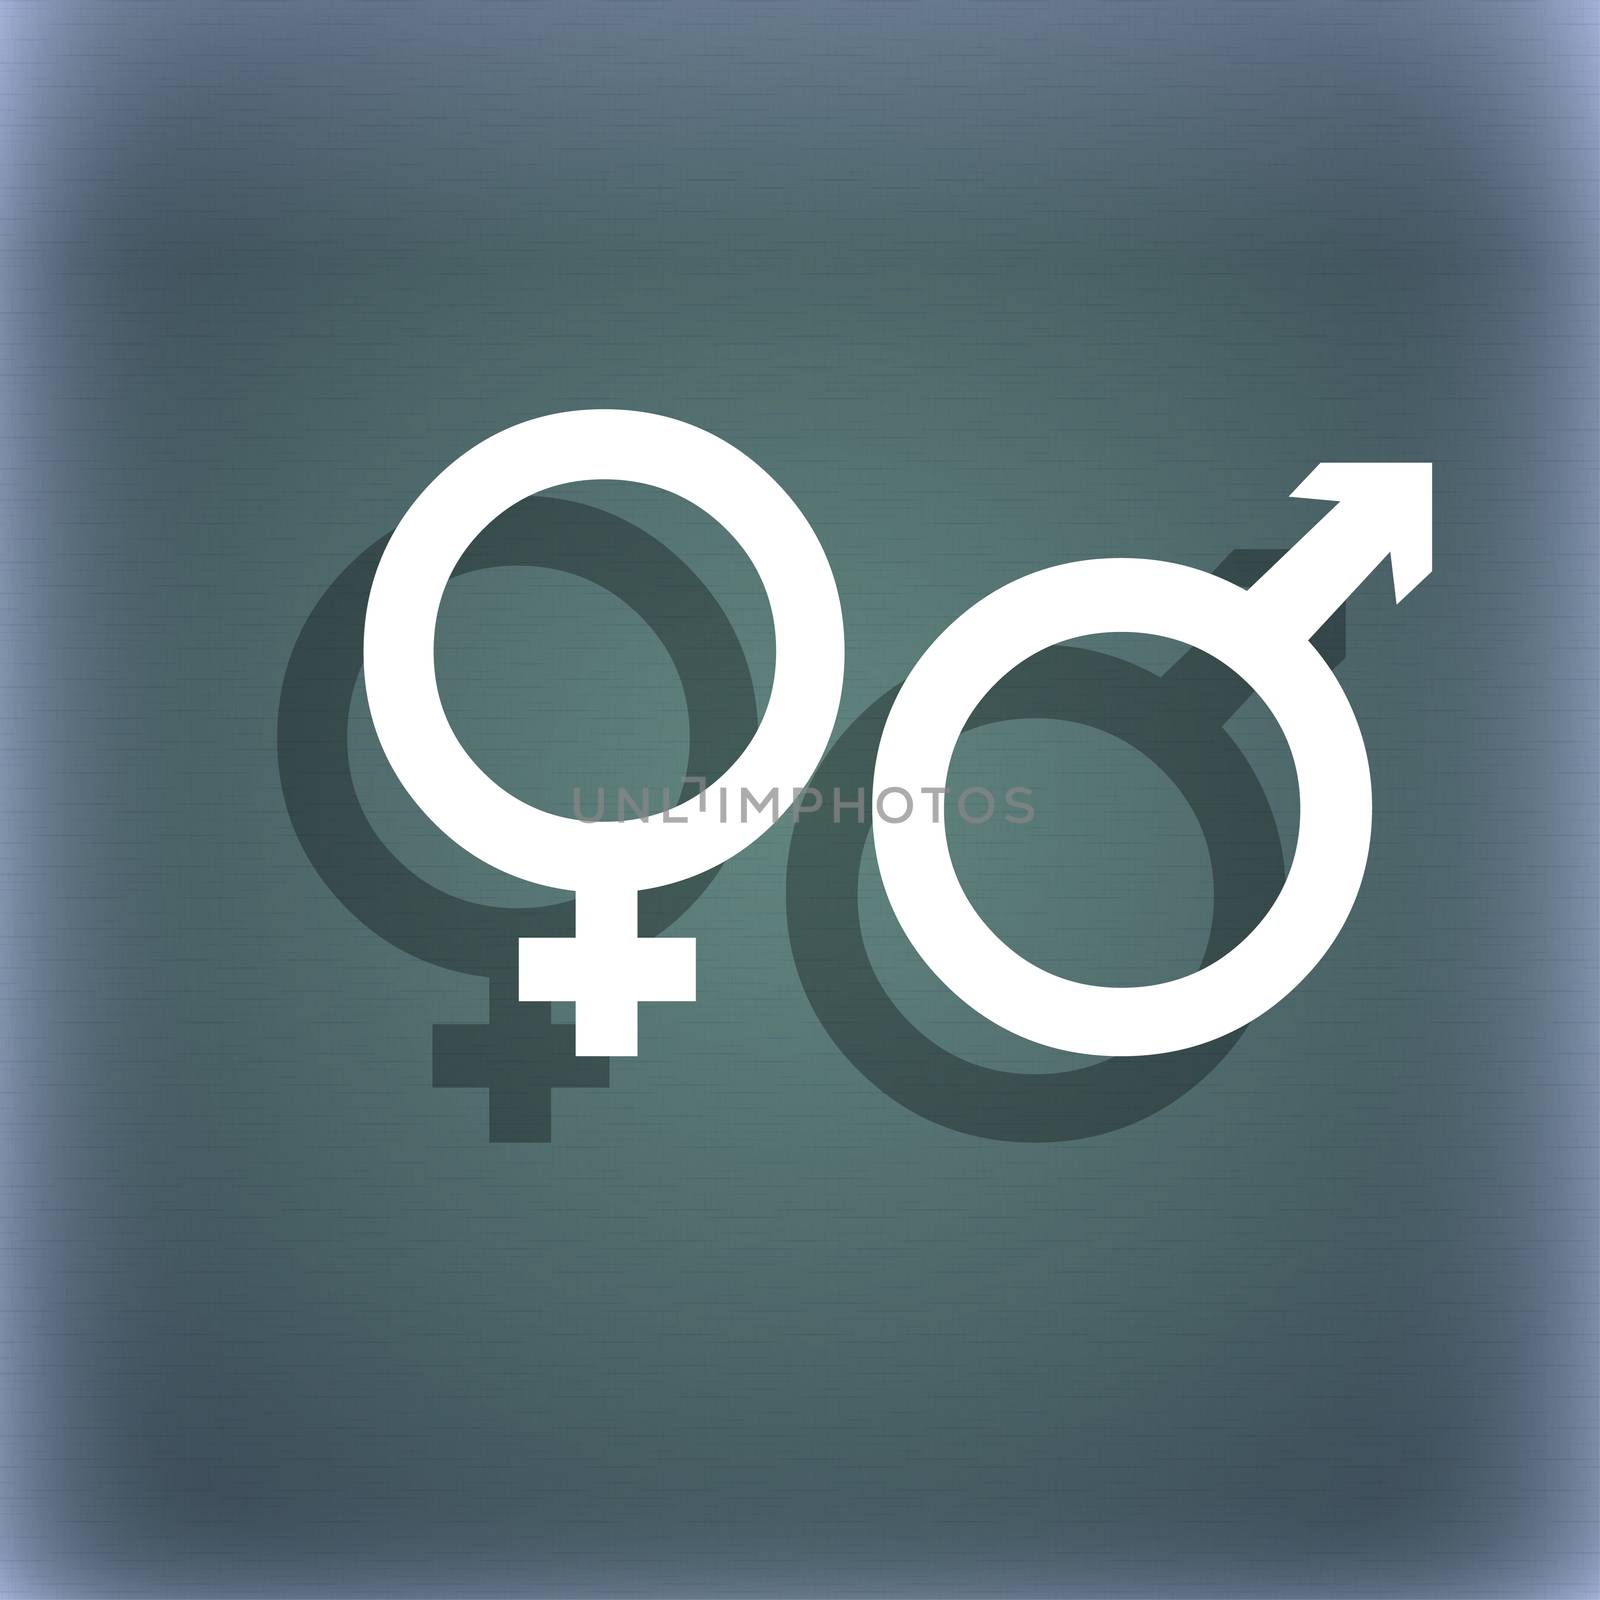 male and female icon symbol on the blue-green abstract background with shadow and space for your text. illustration